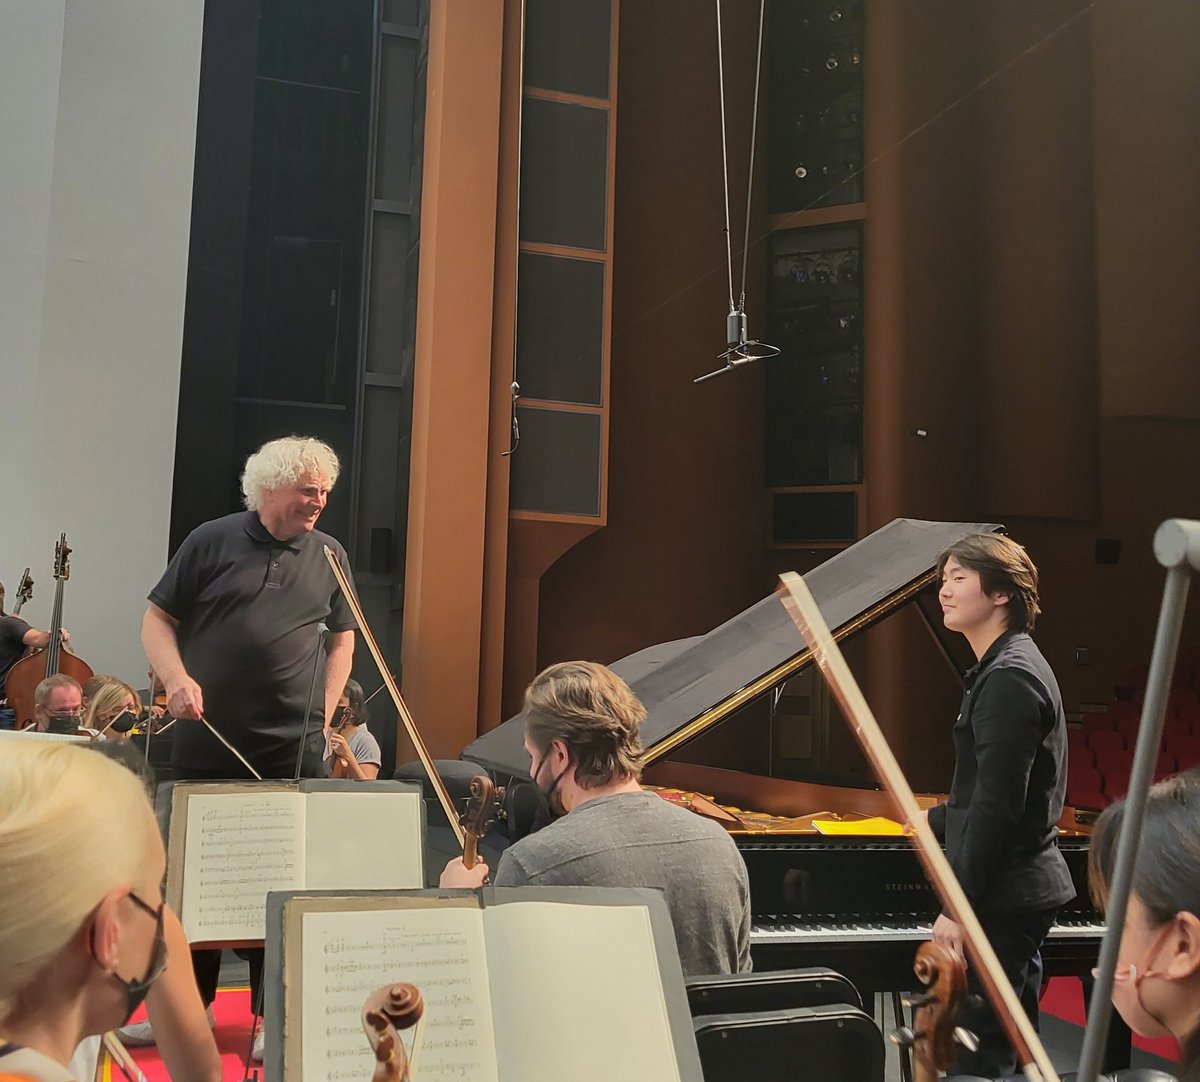 We are at Daejeon Arts with @SeongJinCho ! @londonsymphony @SirSimonRattle